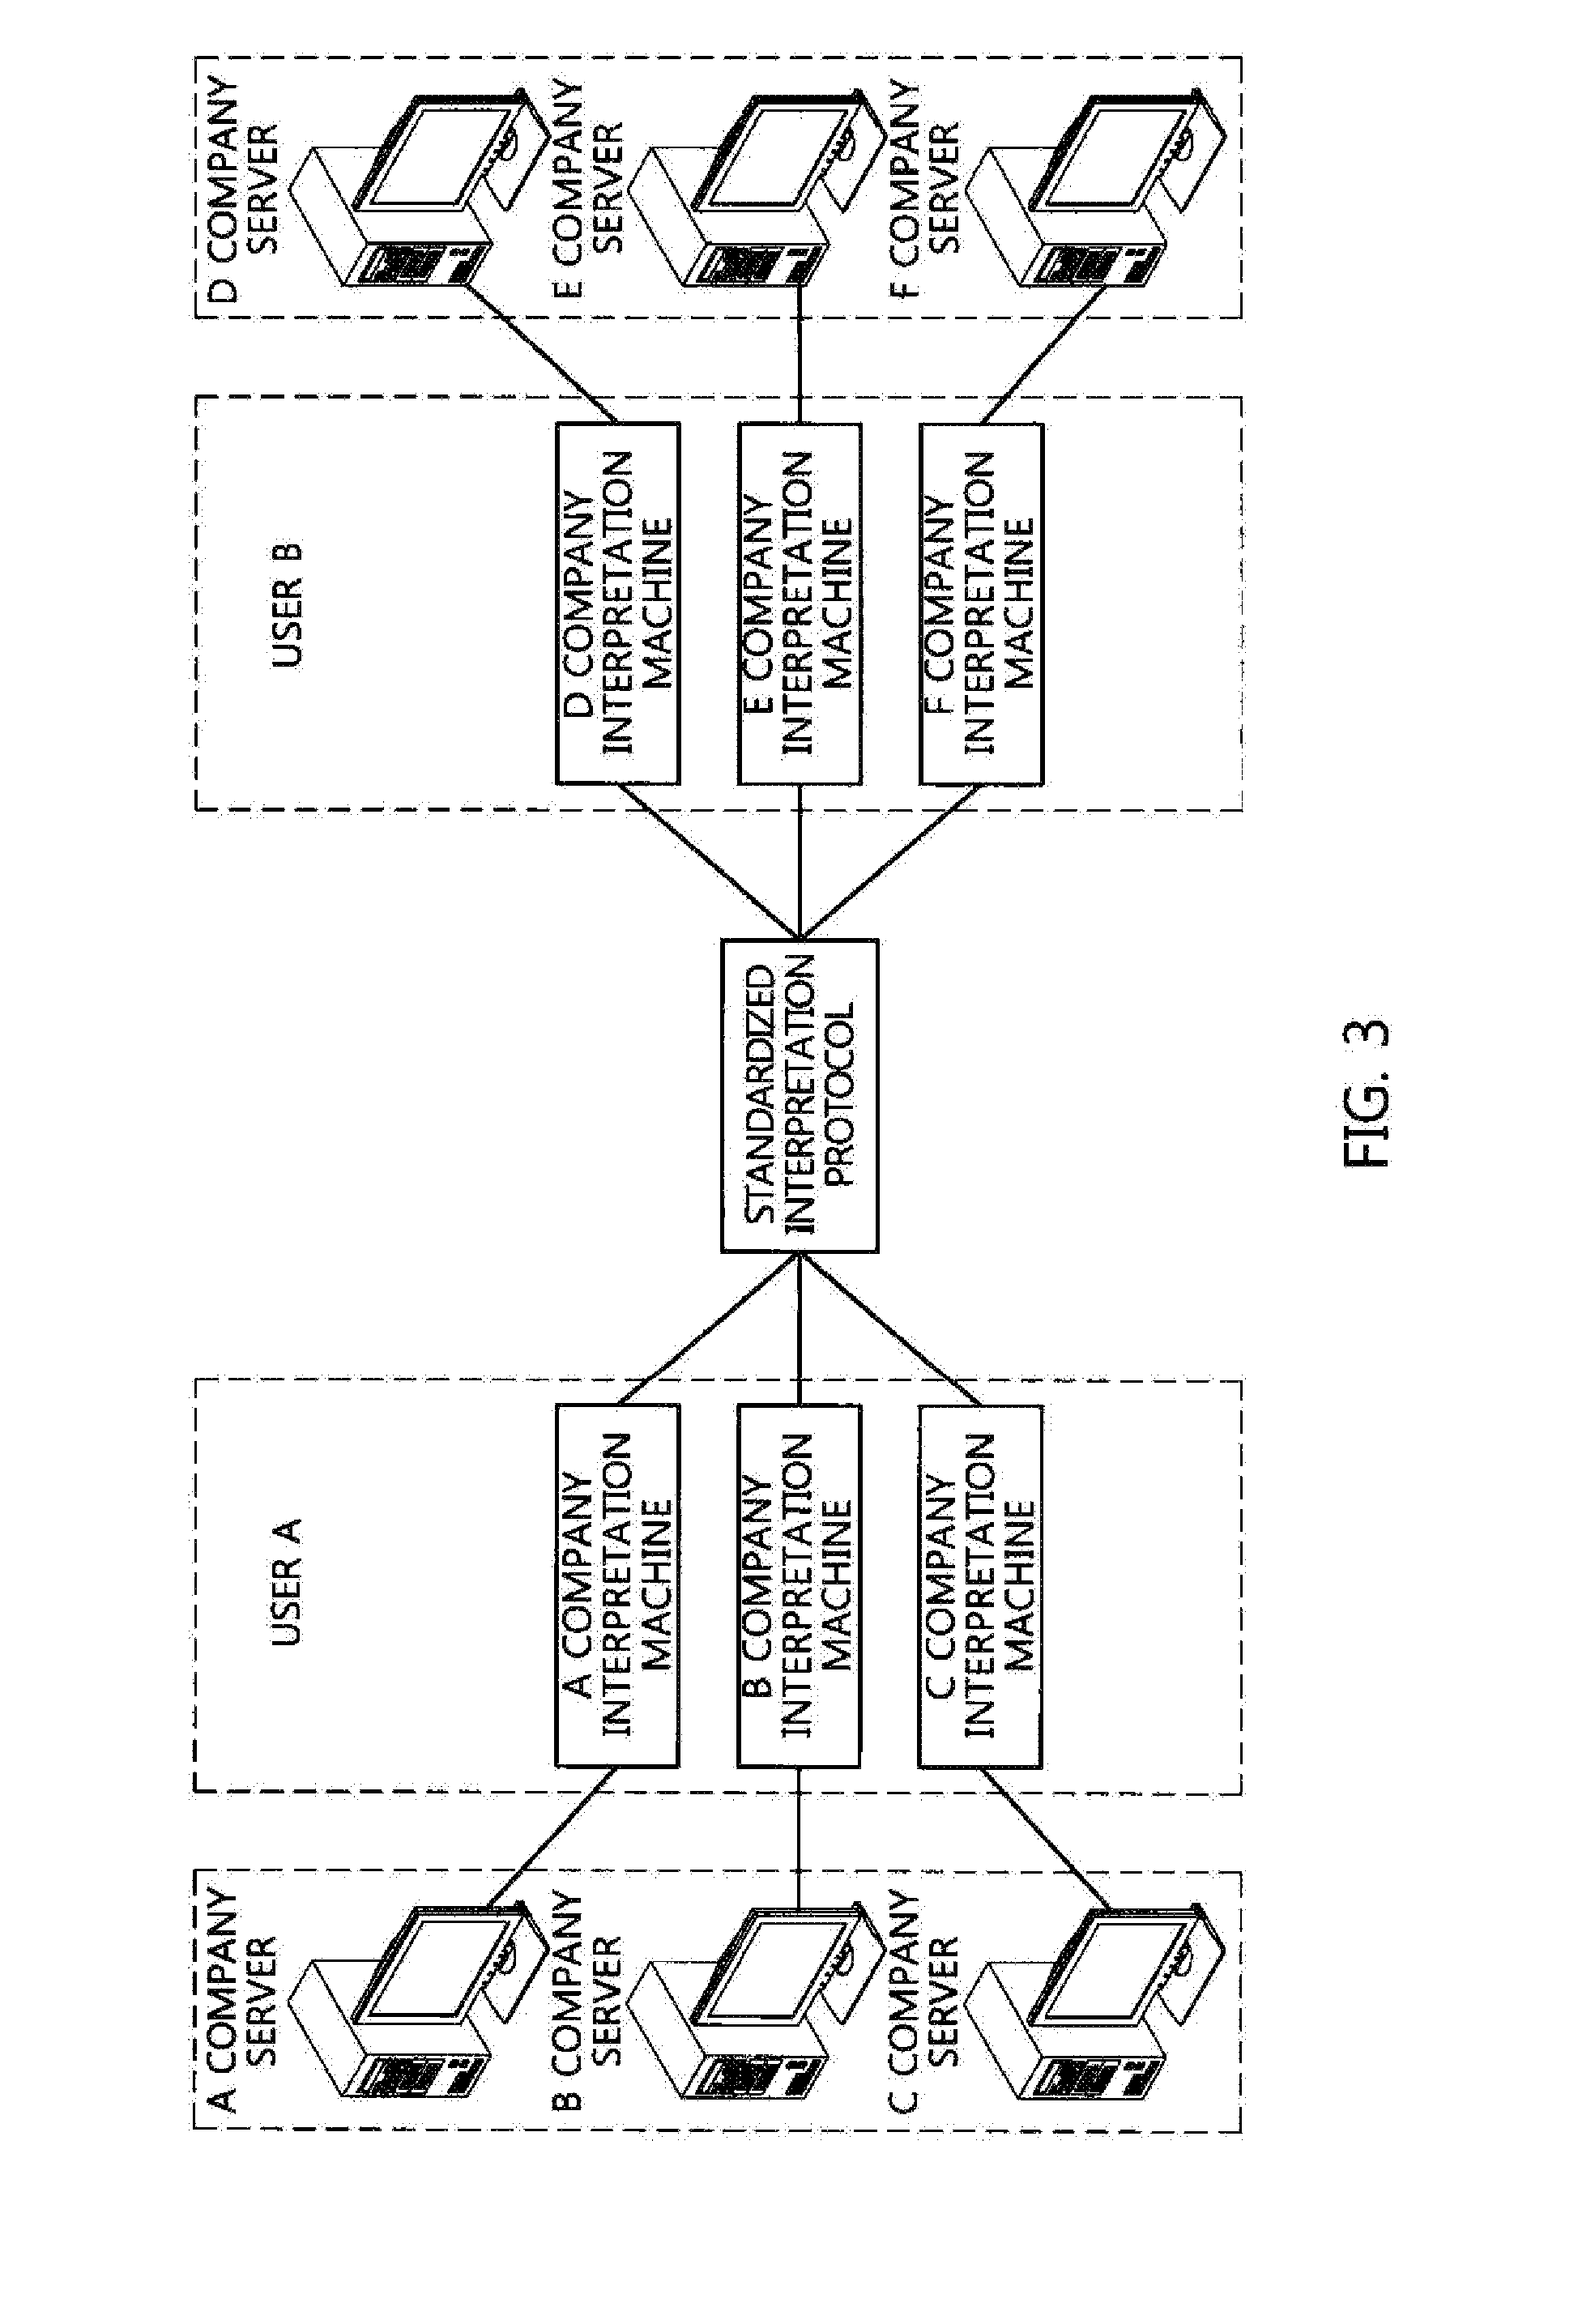 Terminal device and hands-free device for hands-free automatic interpretation service, and hands-free automatic interpretation service method